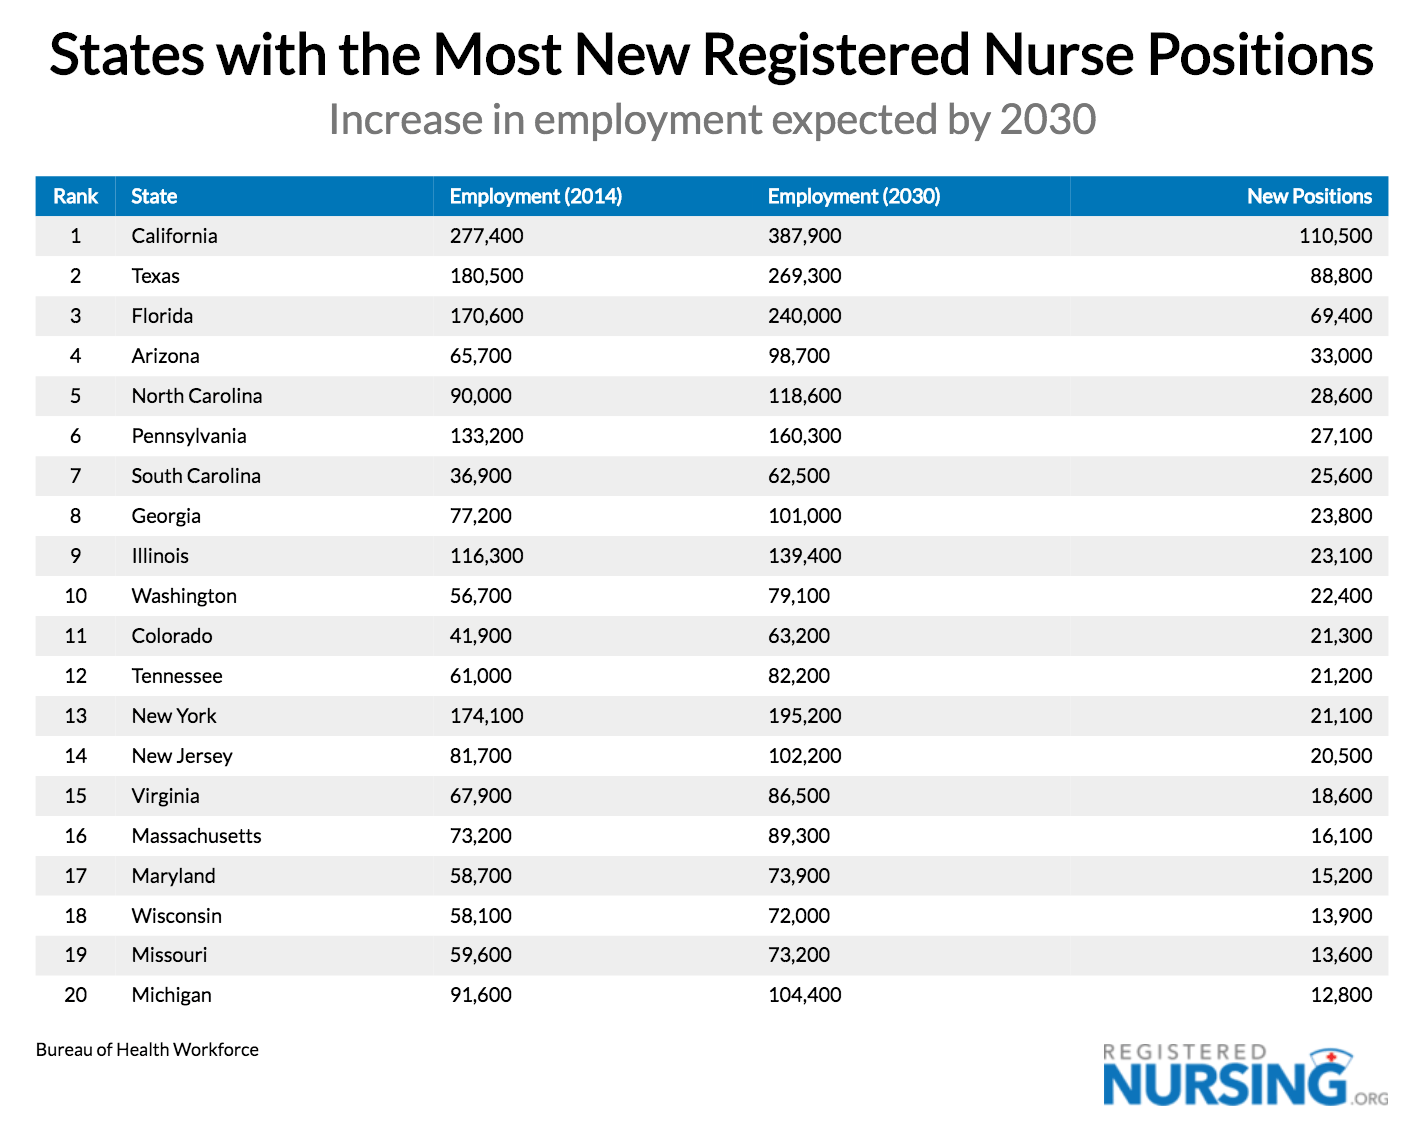 Most New RN Positions by State, Projected 2030